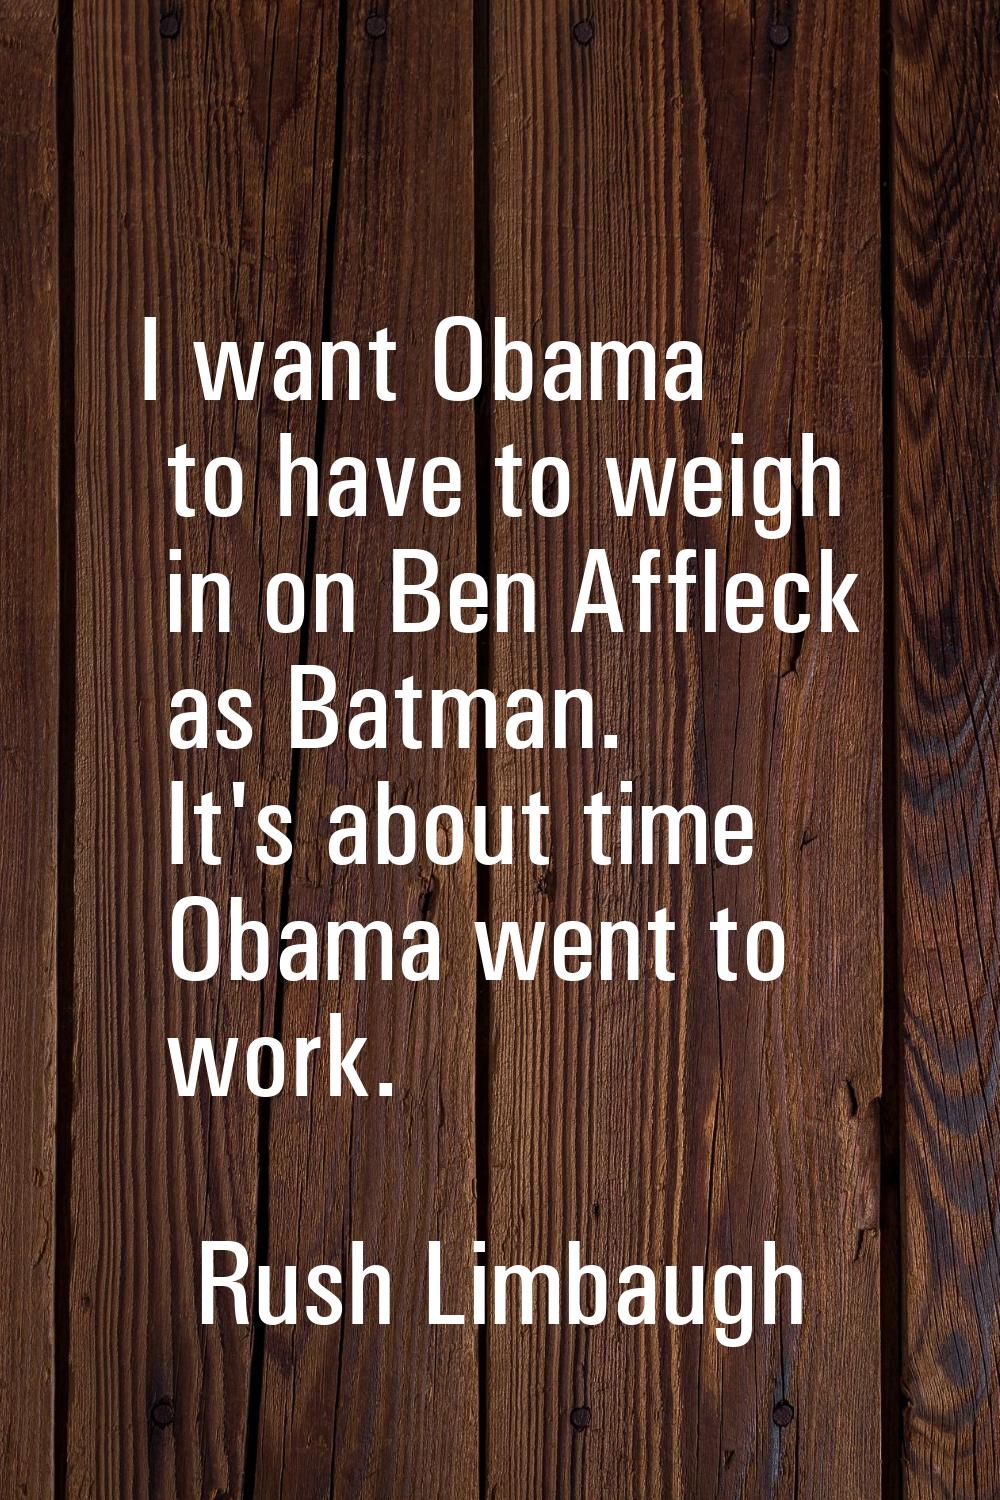 I want Obama to have to weigh in on Ben Affleck as Batman. It's about time Obama went to work.